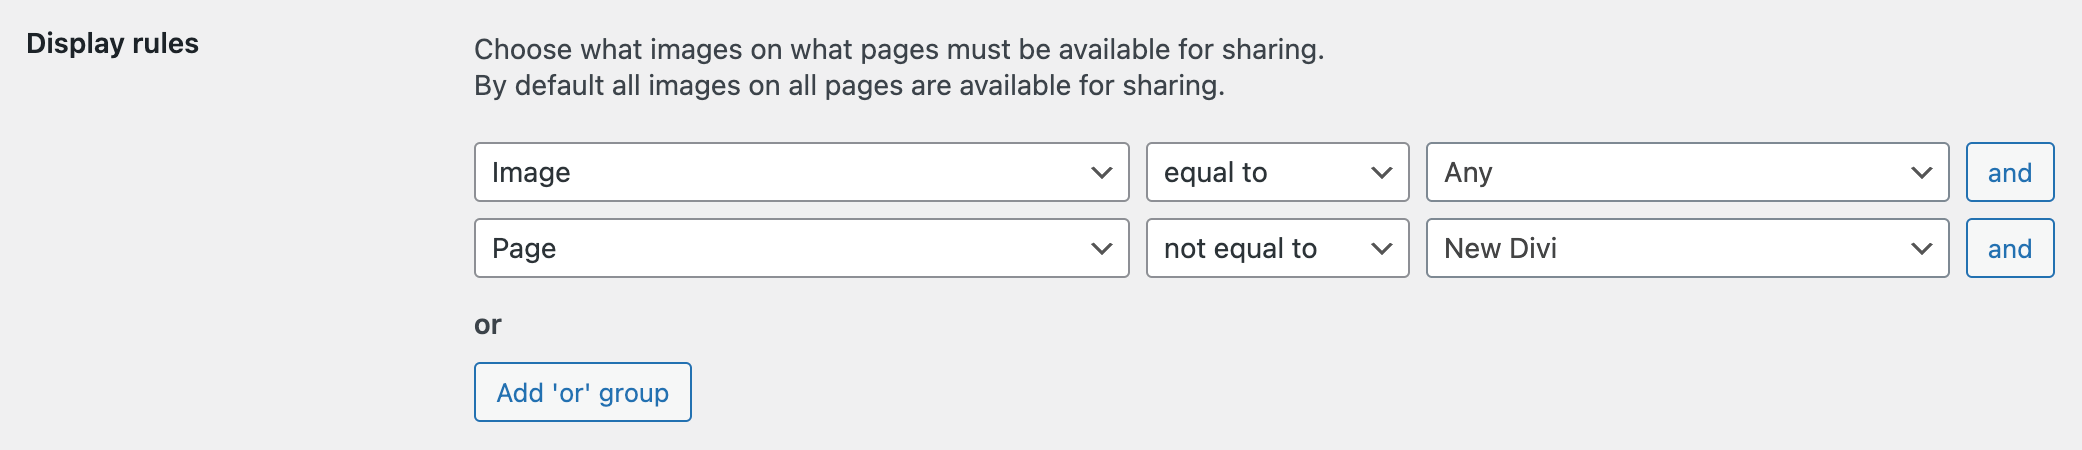 Exclude for sharing all images from the page